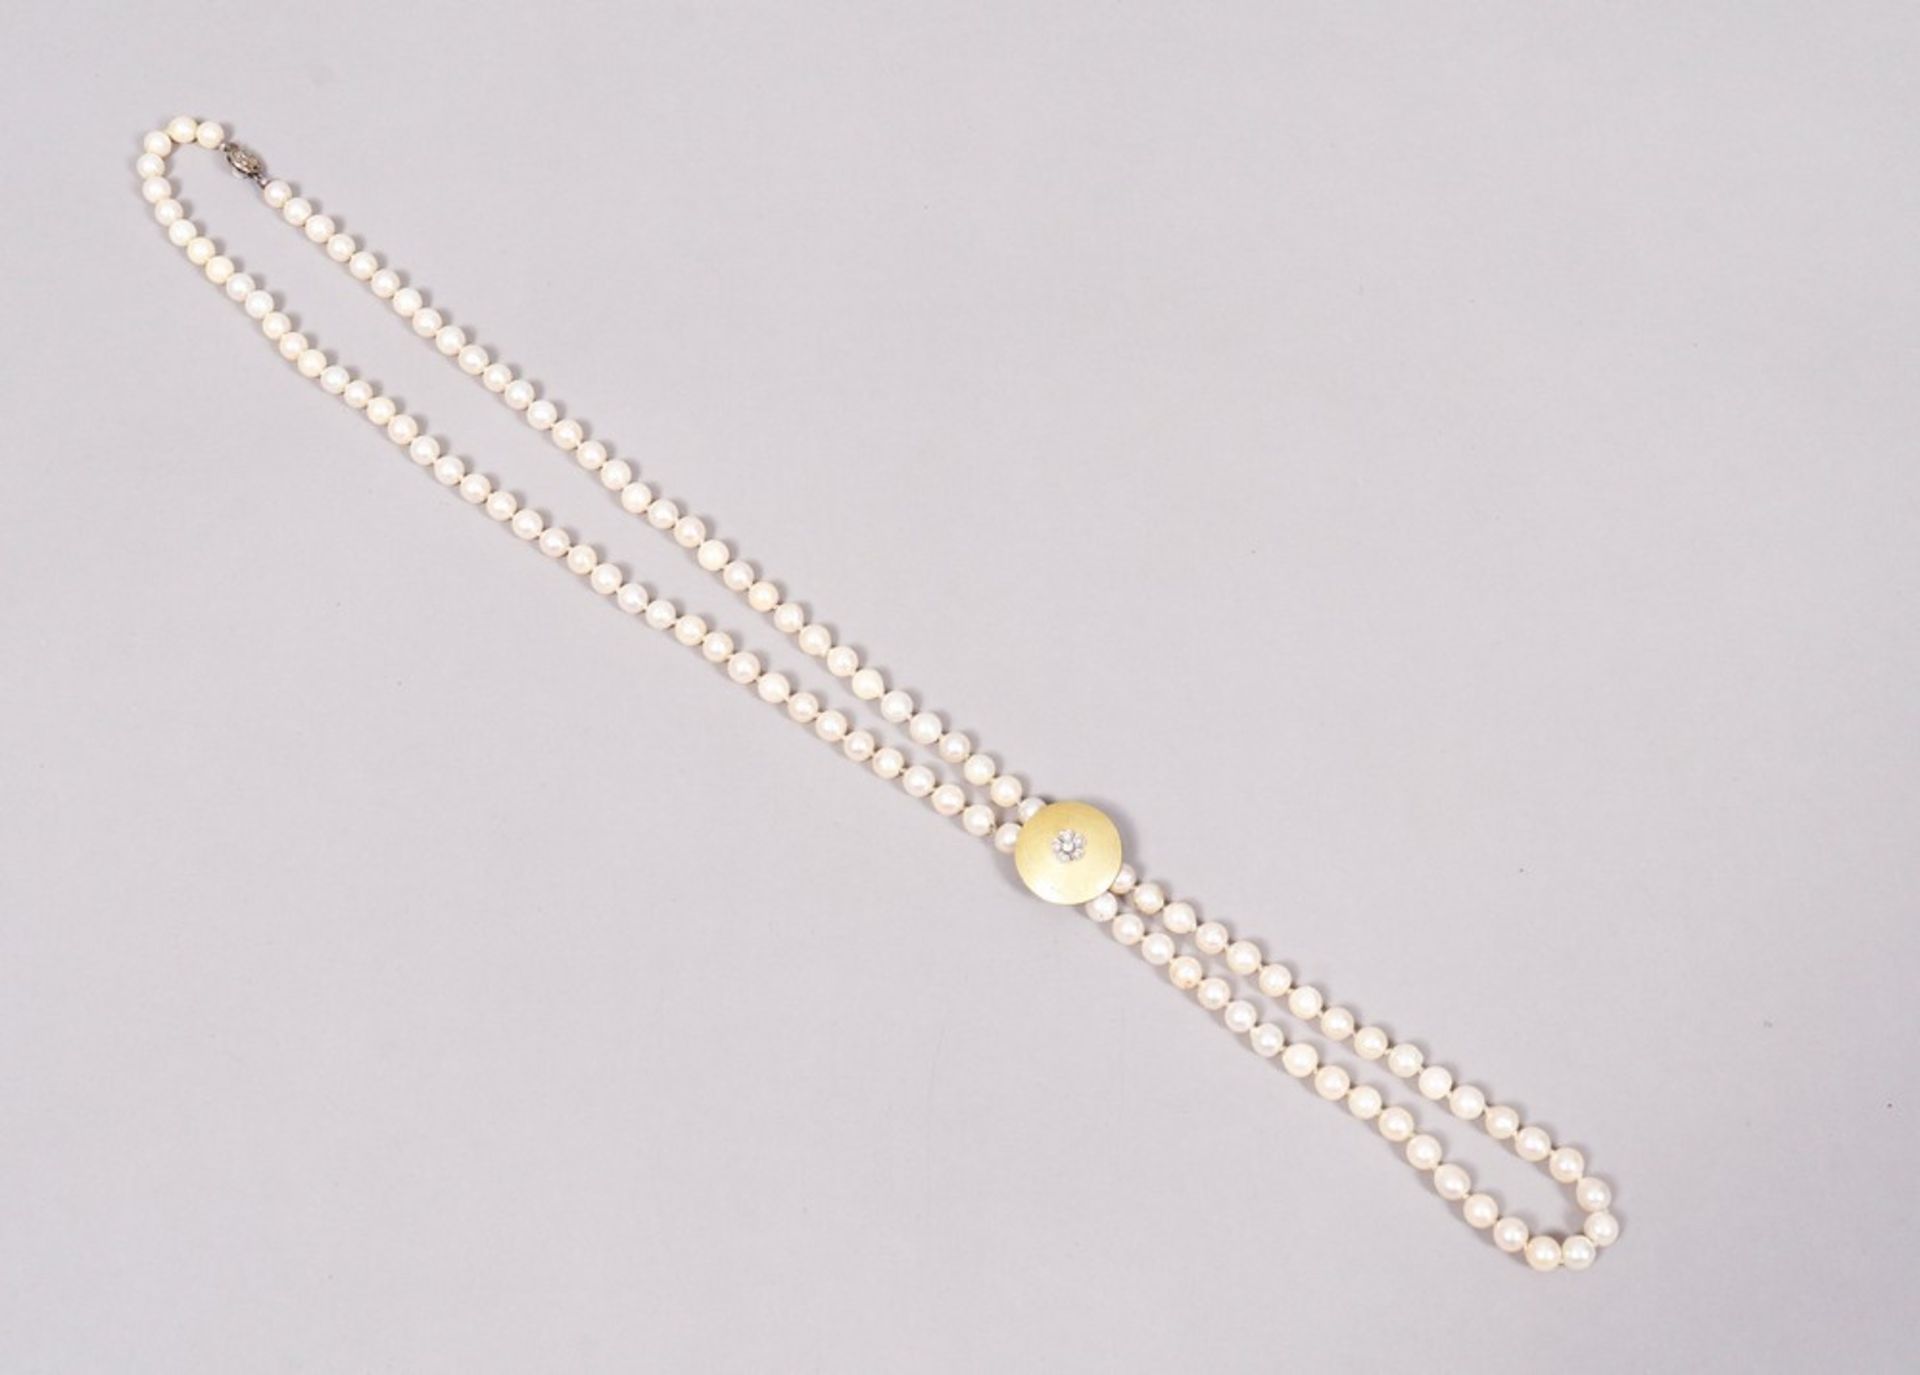 Long pearl necklace  - Image 2 of 4